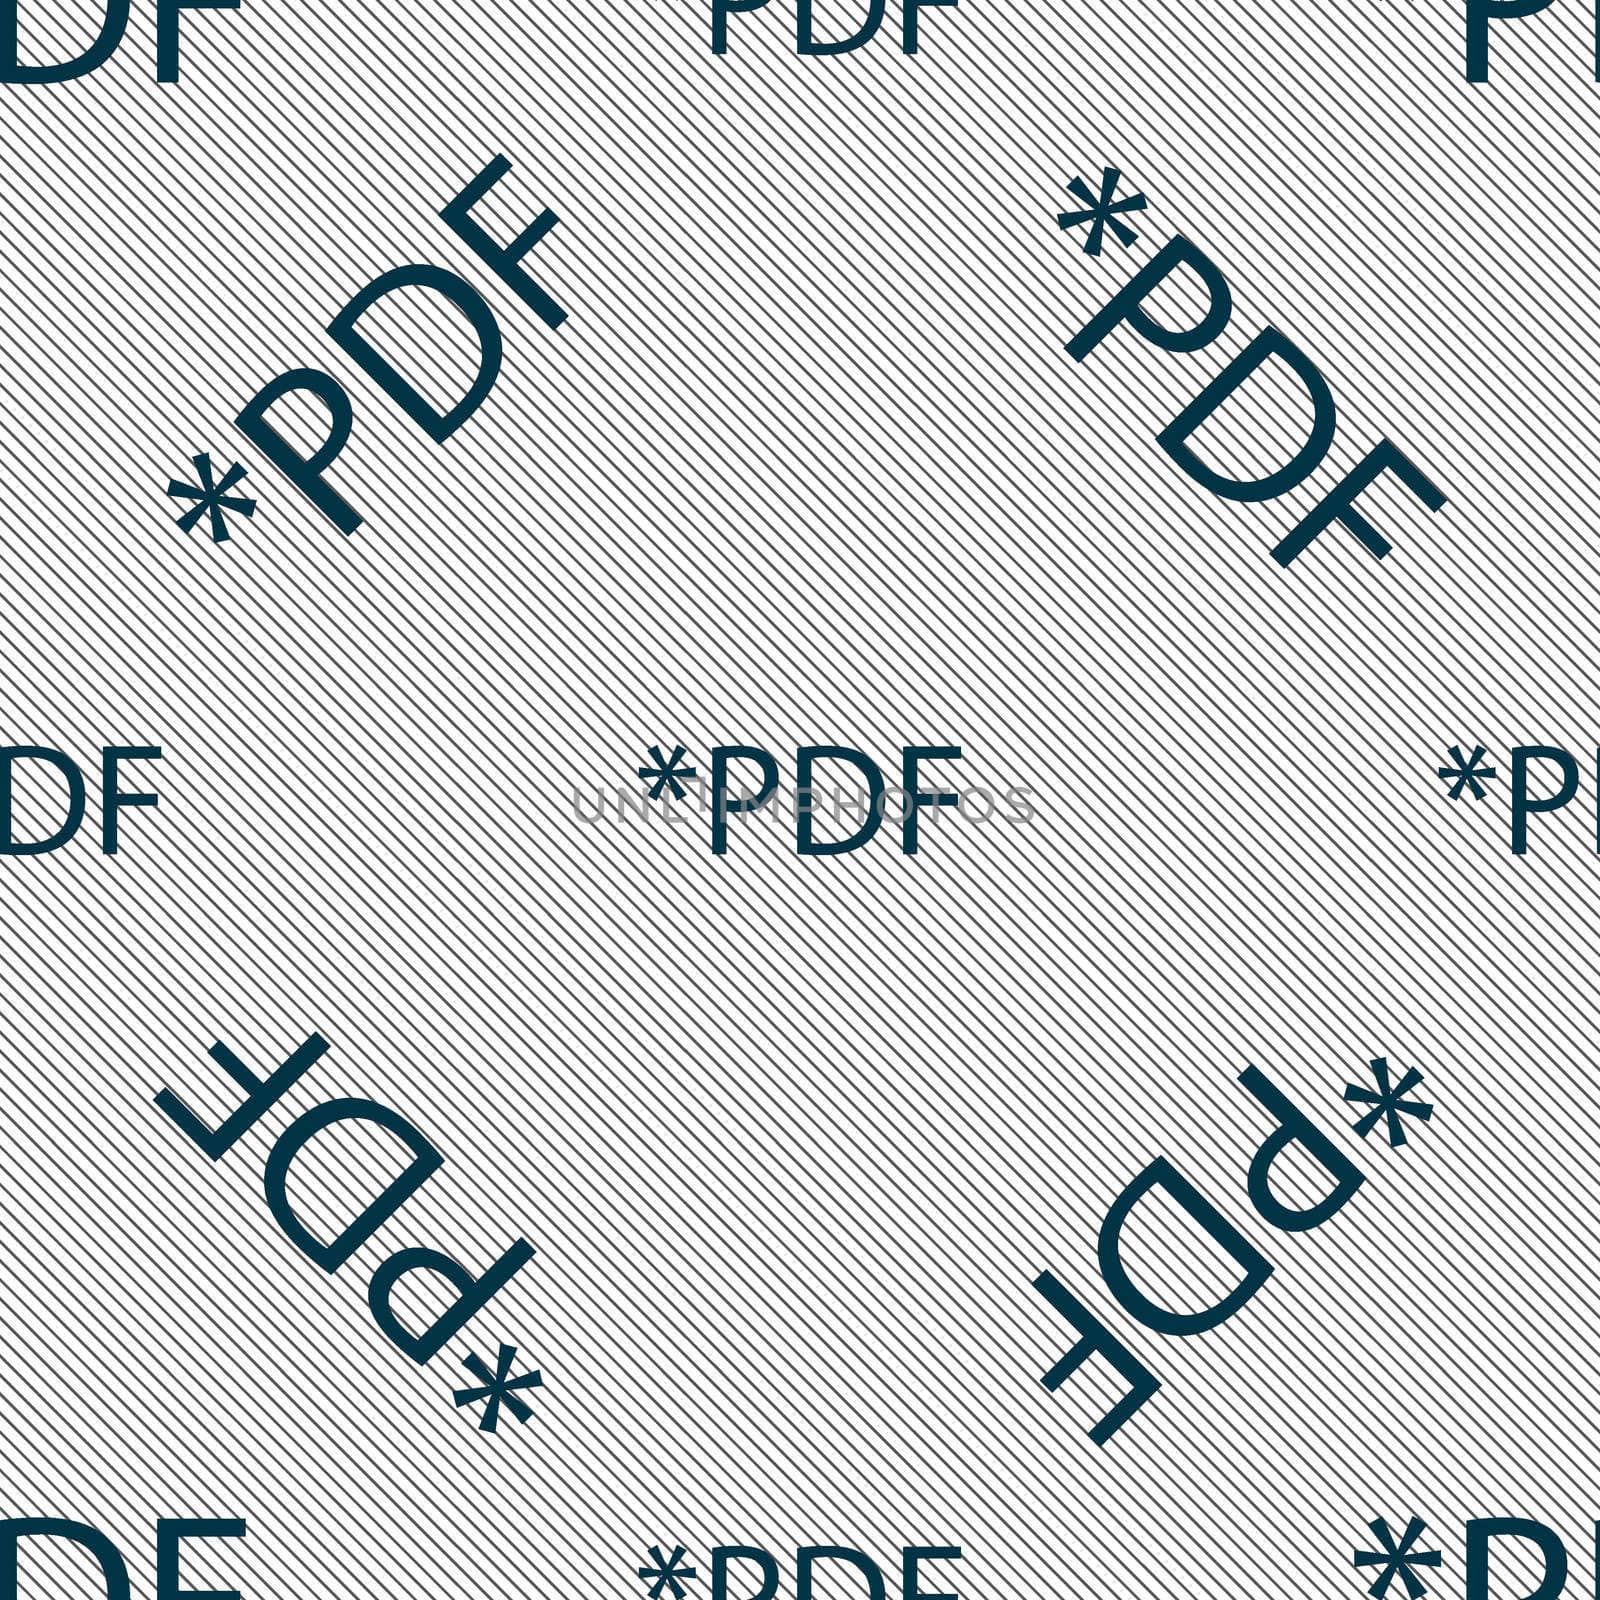 PDF file document icon. Download pdf button. PDF file extension symbol. Seamless pattern with geometric texture. illustration